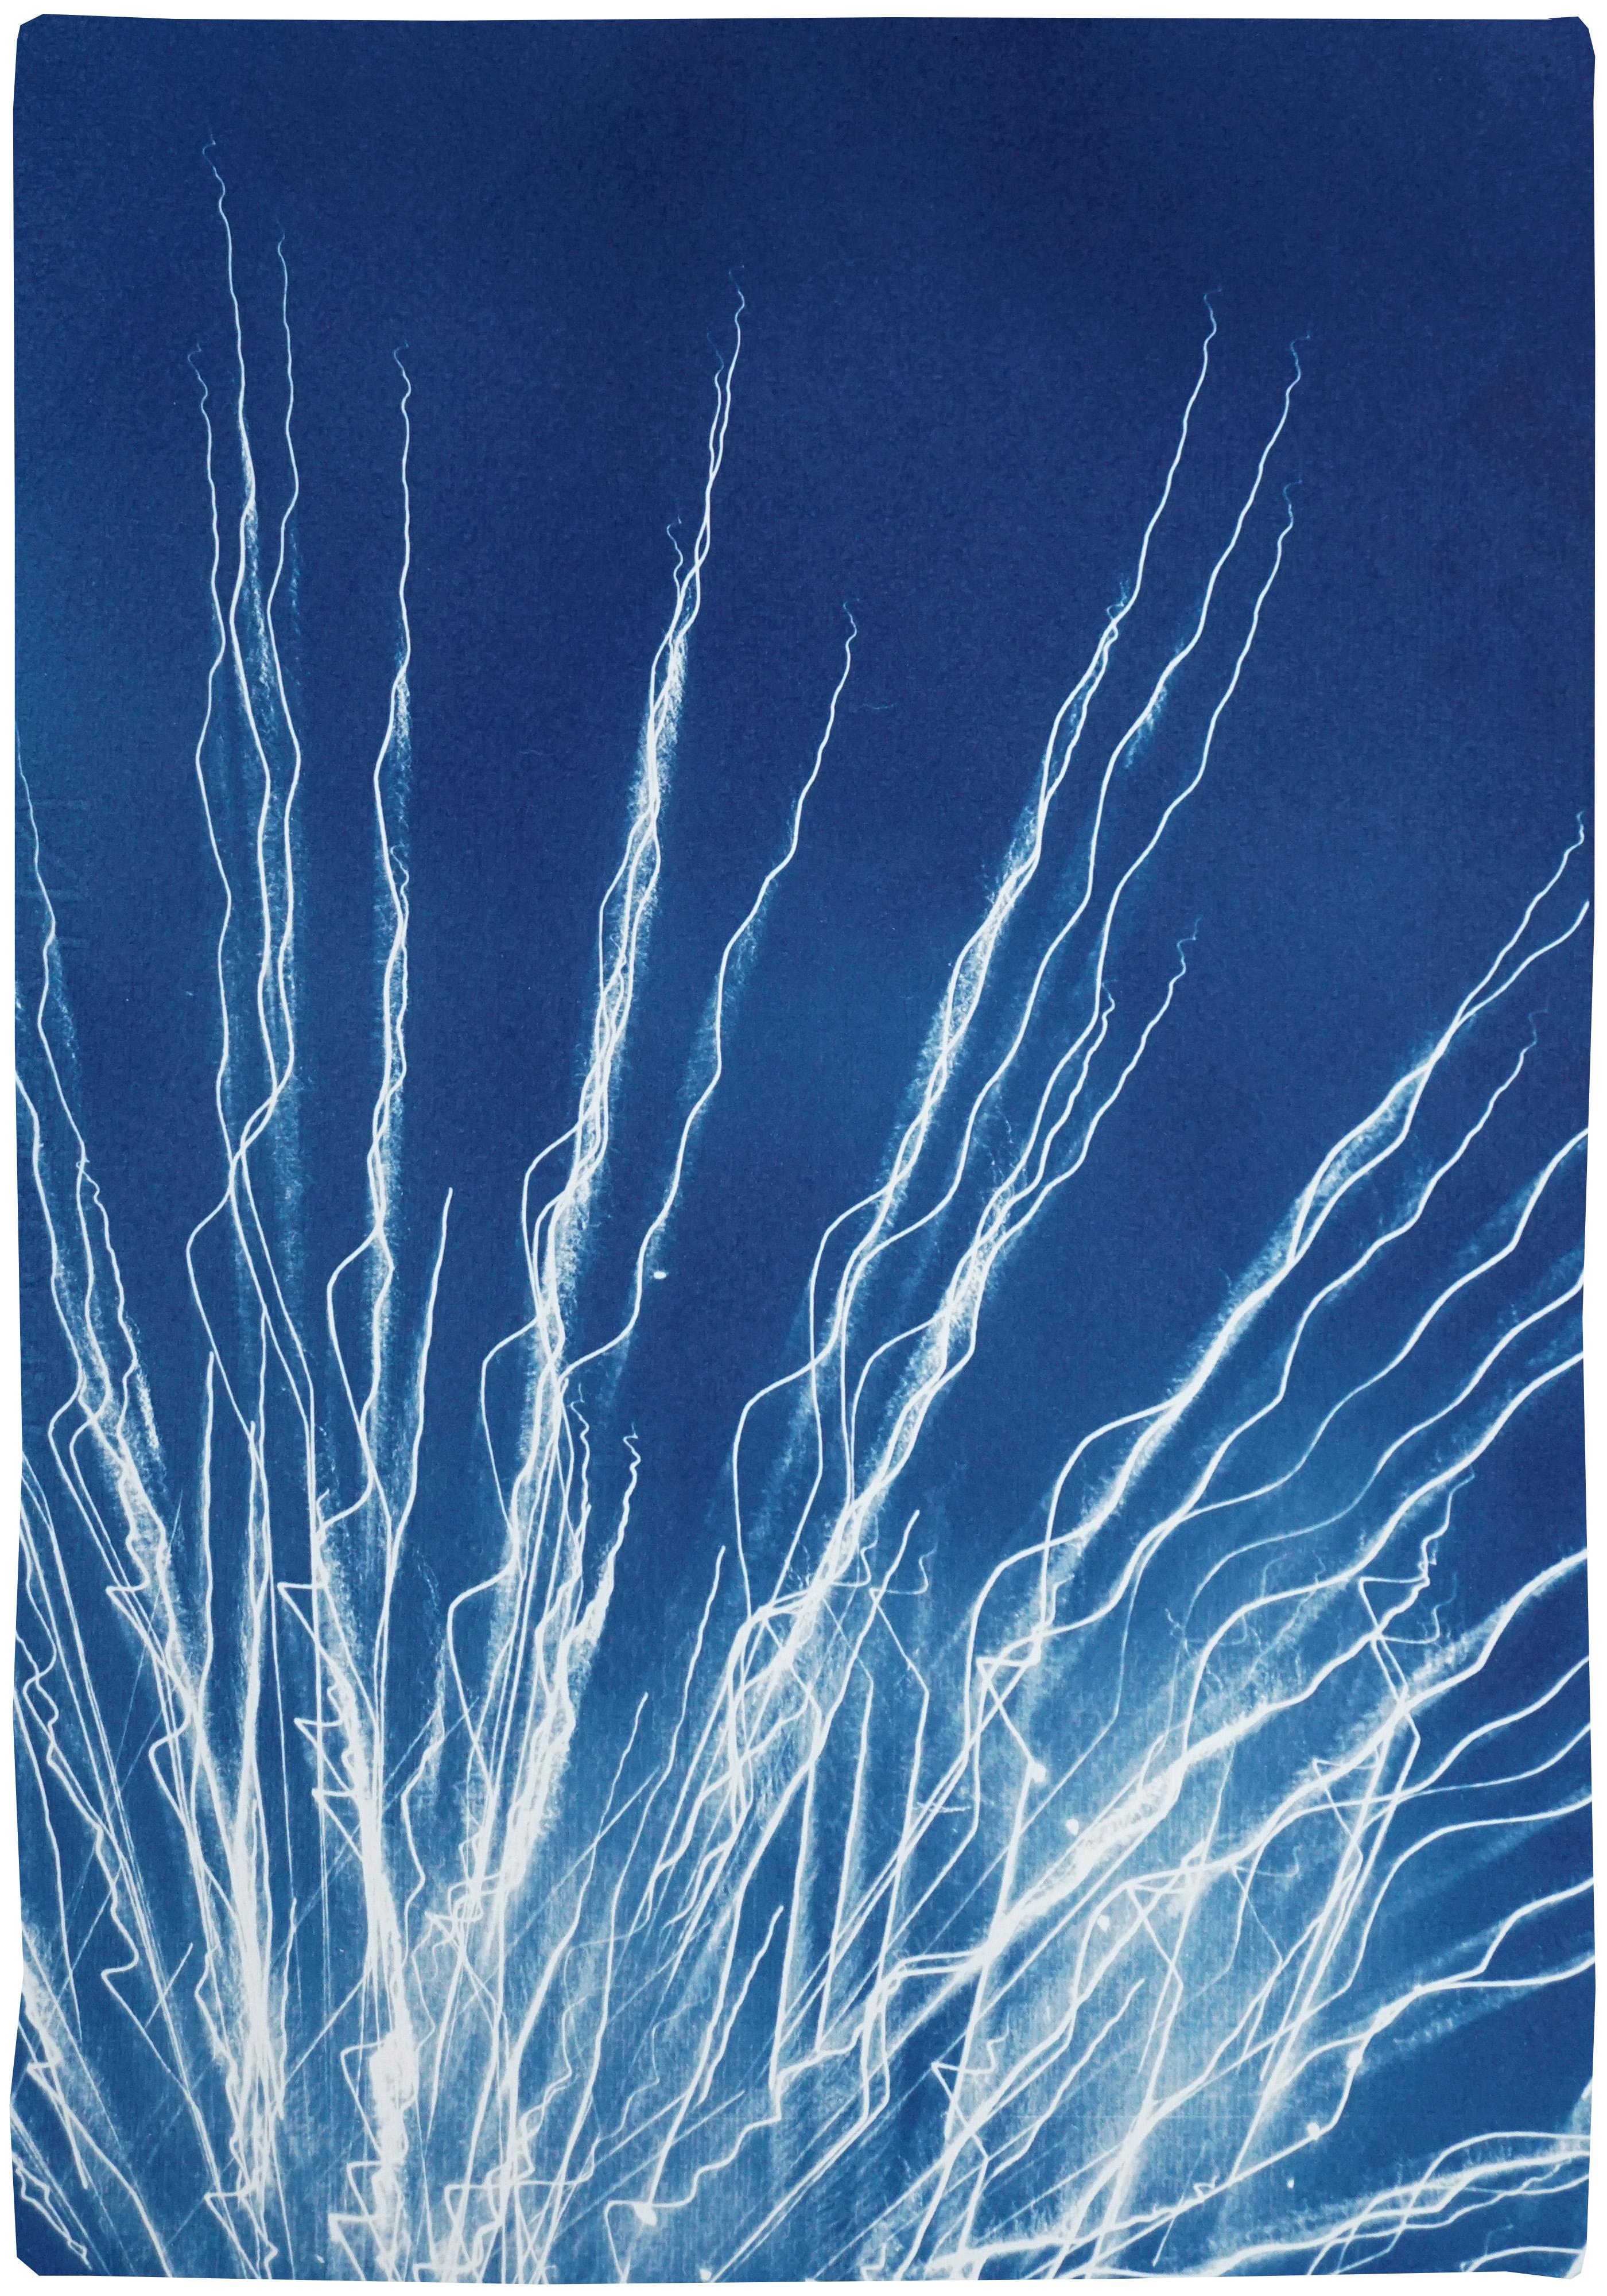 Glowing Fireworks Lights, Blue and White Contemporary Cyanotype on Paper, 2020